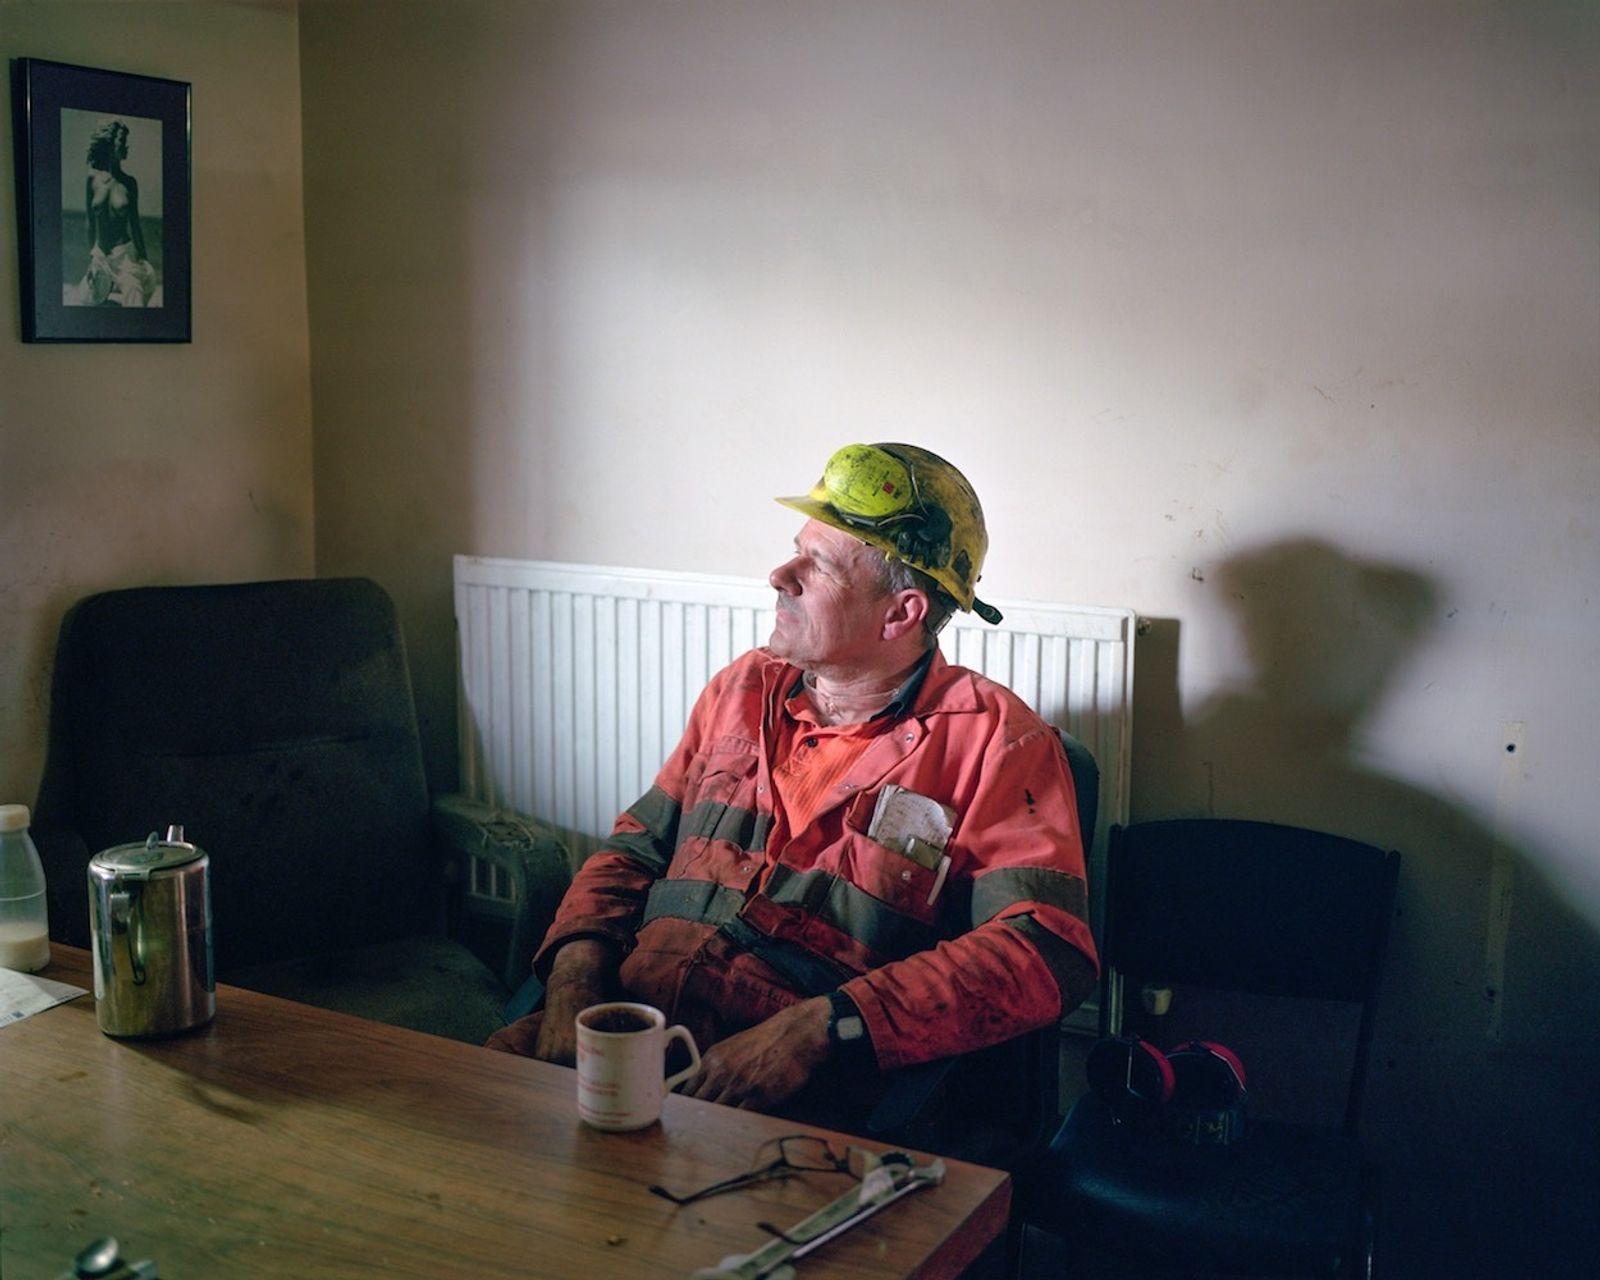 © David Severn, from the series, Thanks Maggie. A mineworker taking a tea break at Thoresby Colliery.